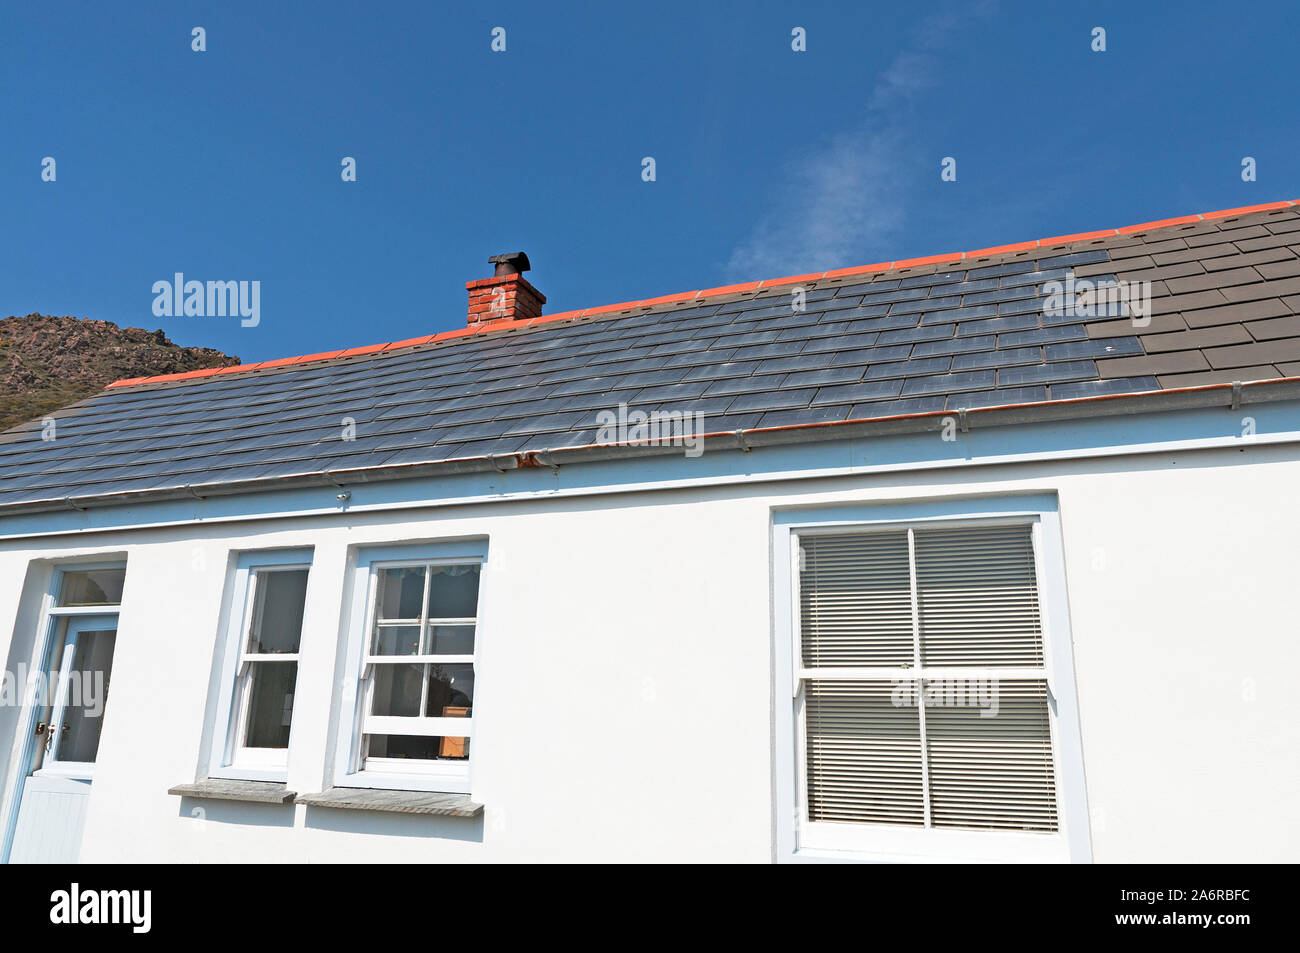 solar tiles photovoltaic tile on a home house roof Stock Photo